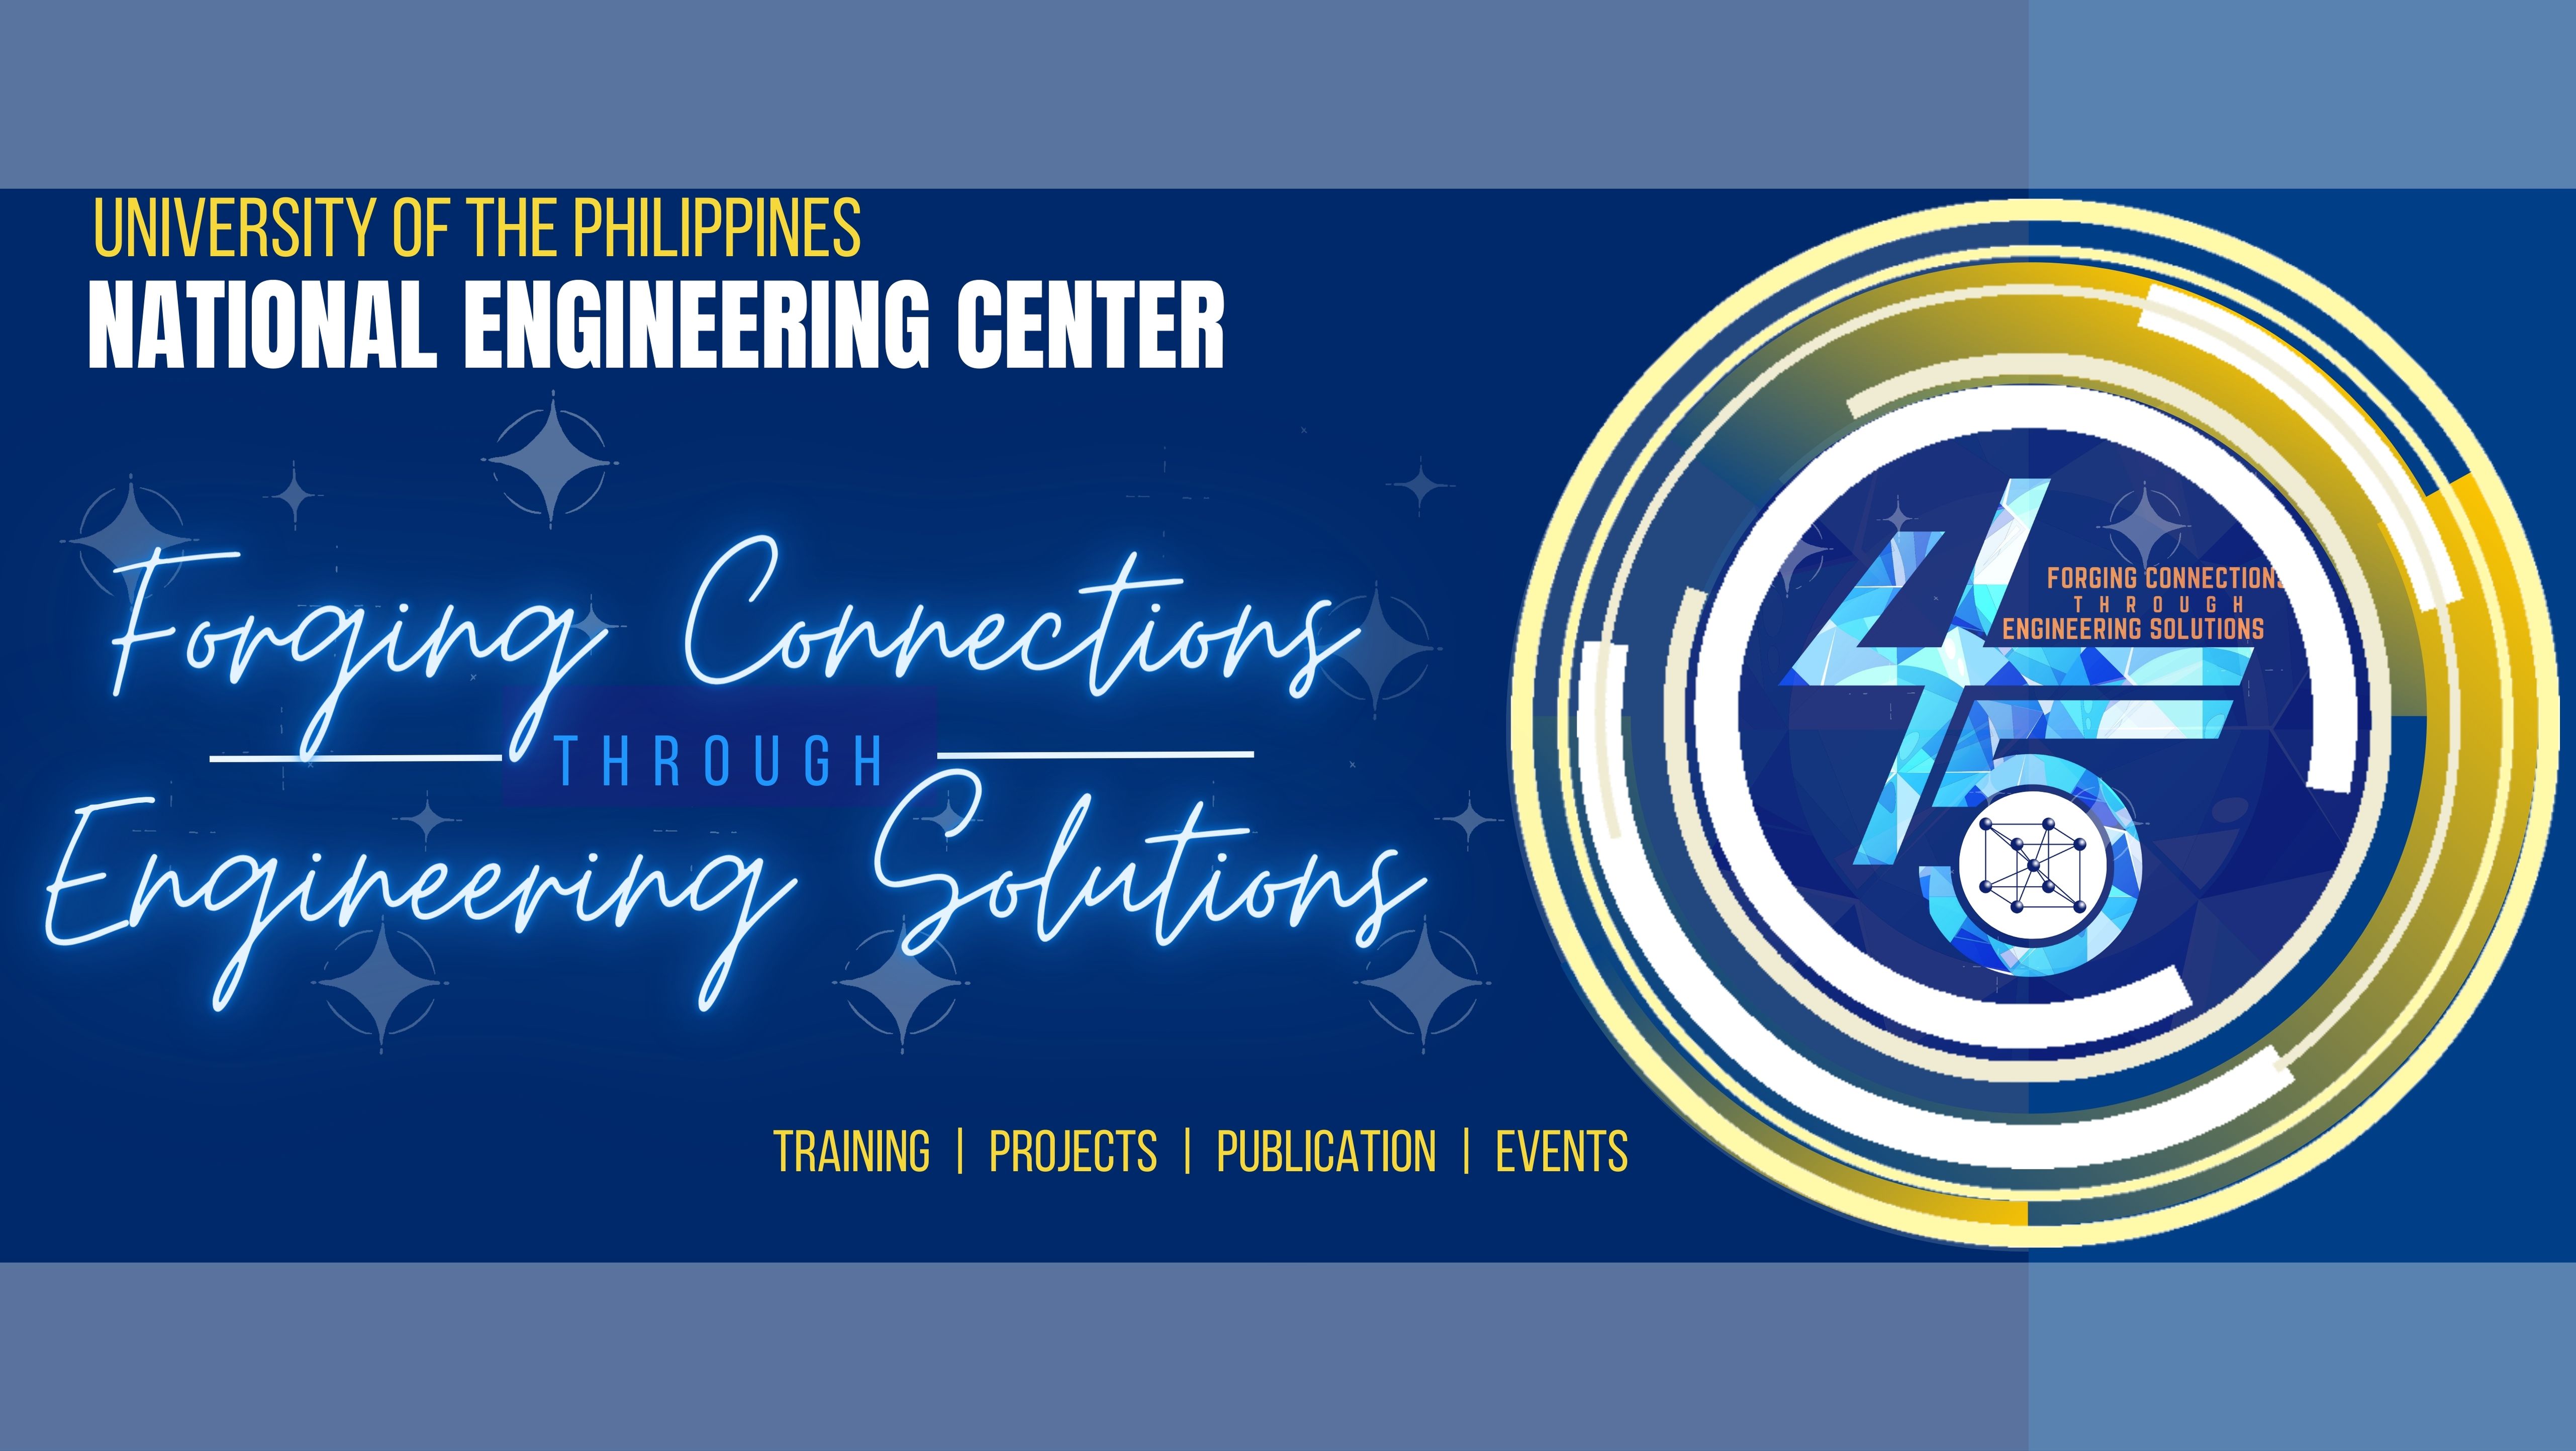 UP NEC Celebrates 45 Years of Forging Connections